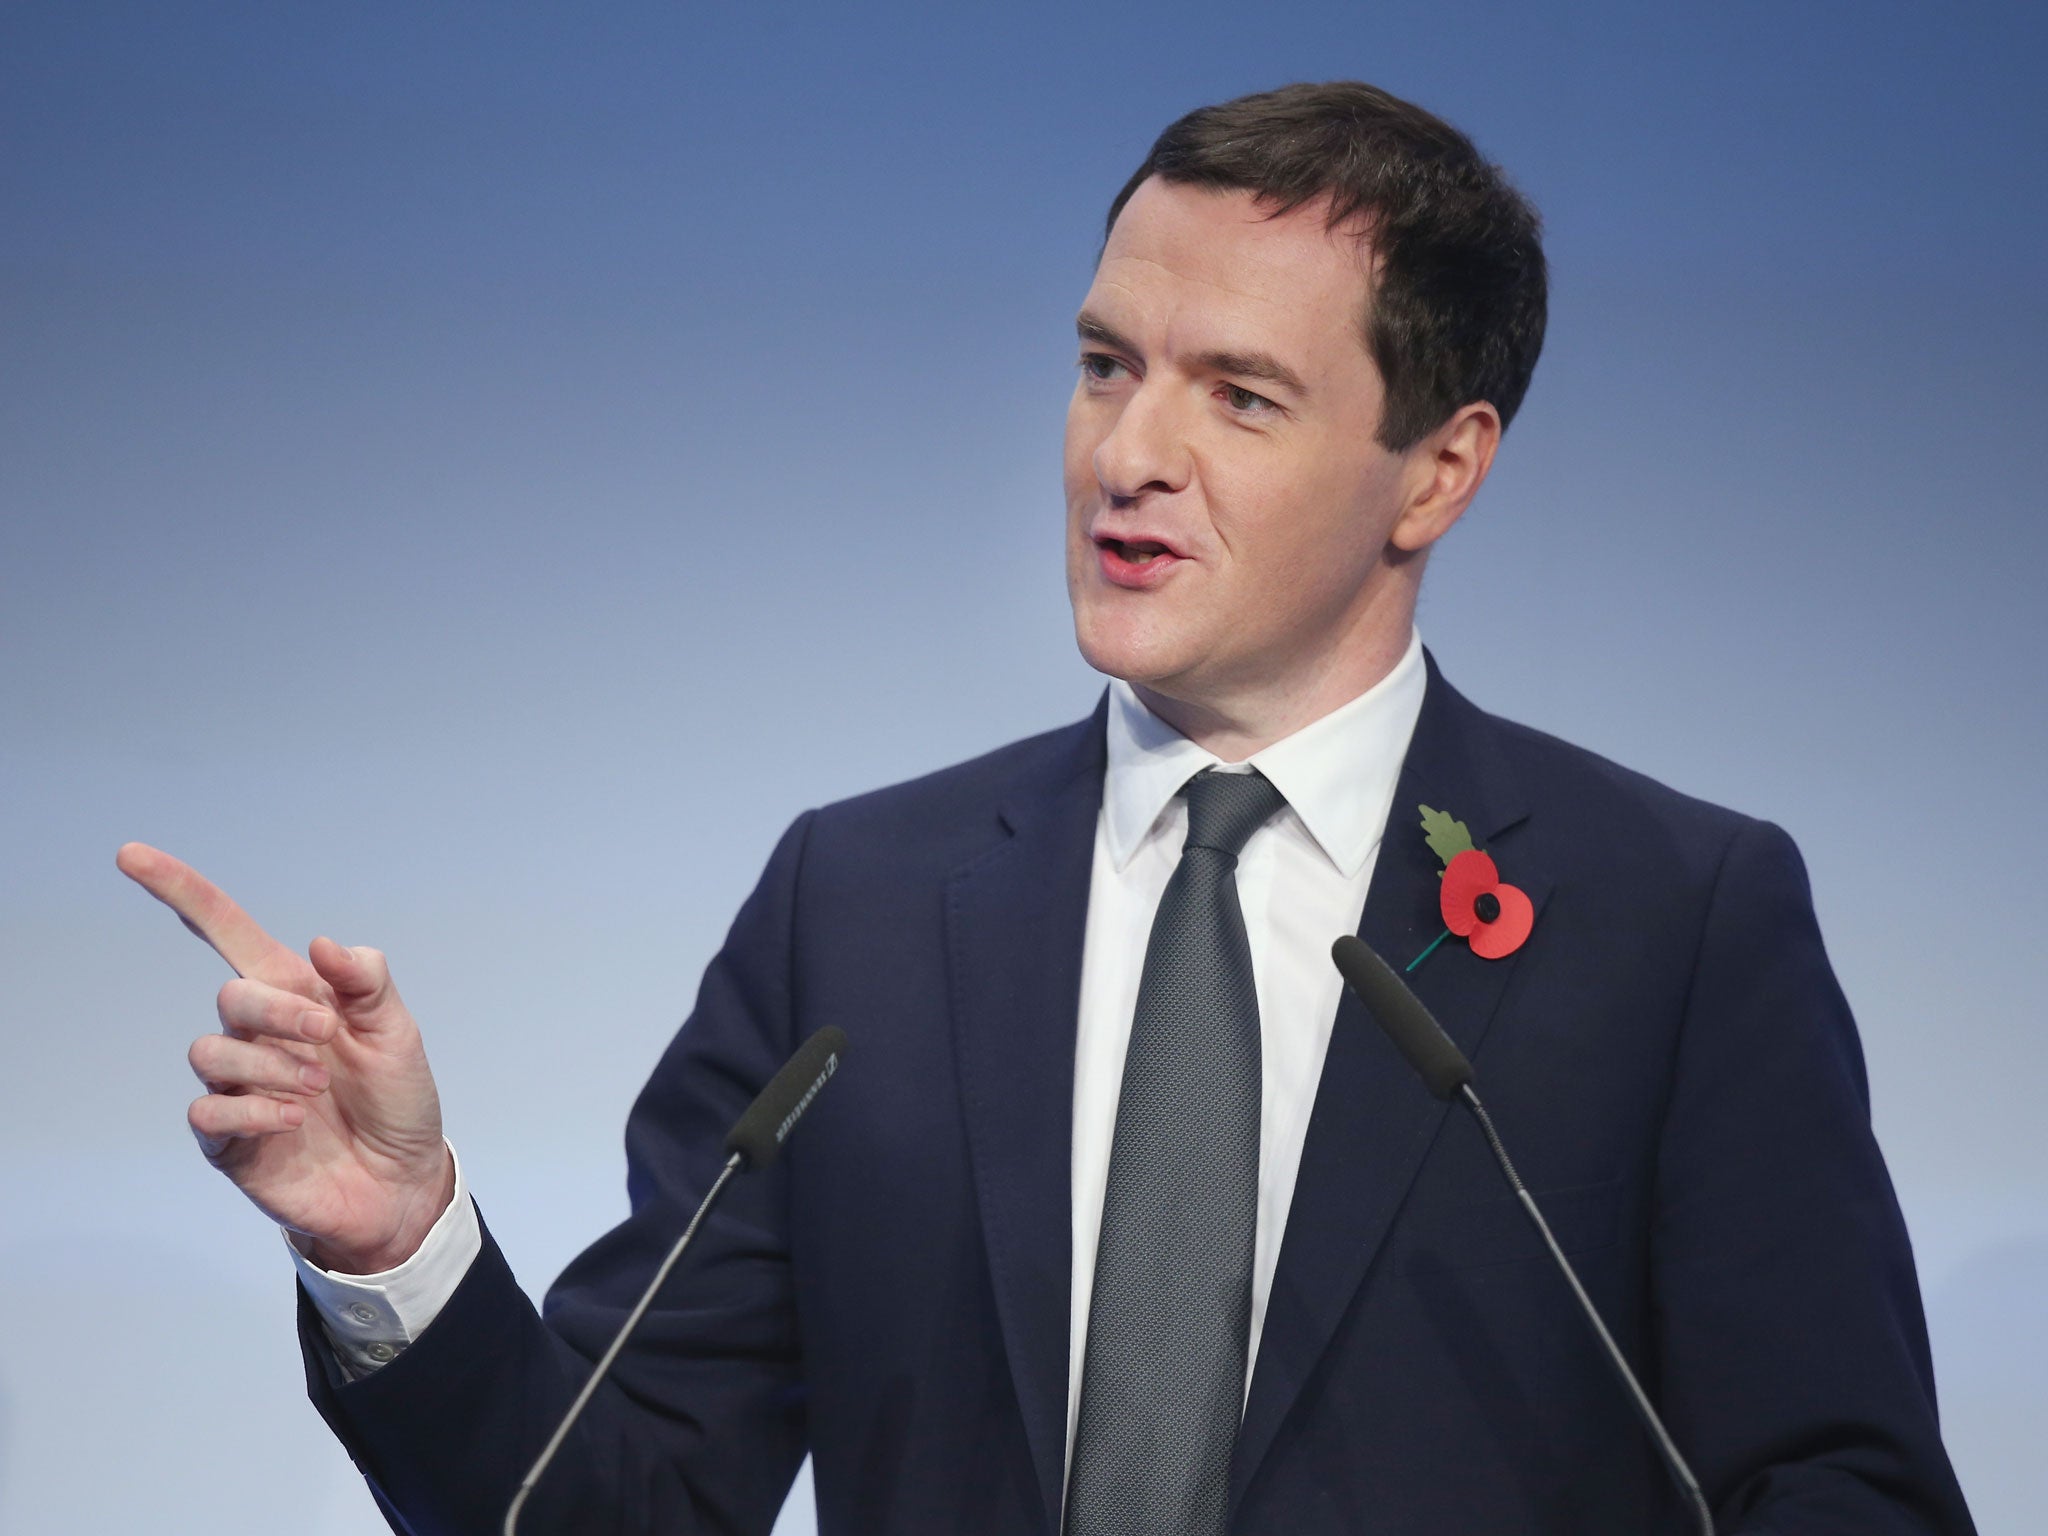 It is rumoured the Chancellor may look to reduce the higher rate of stamp duty land tax